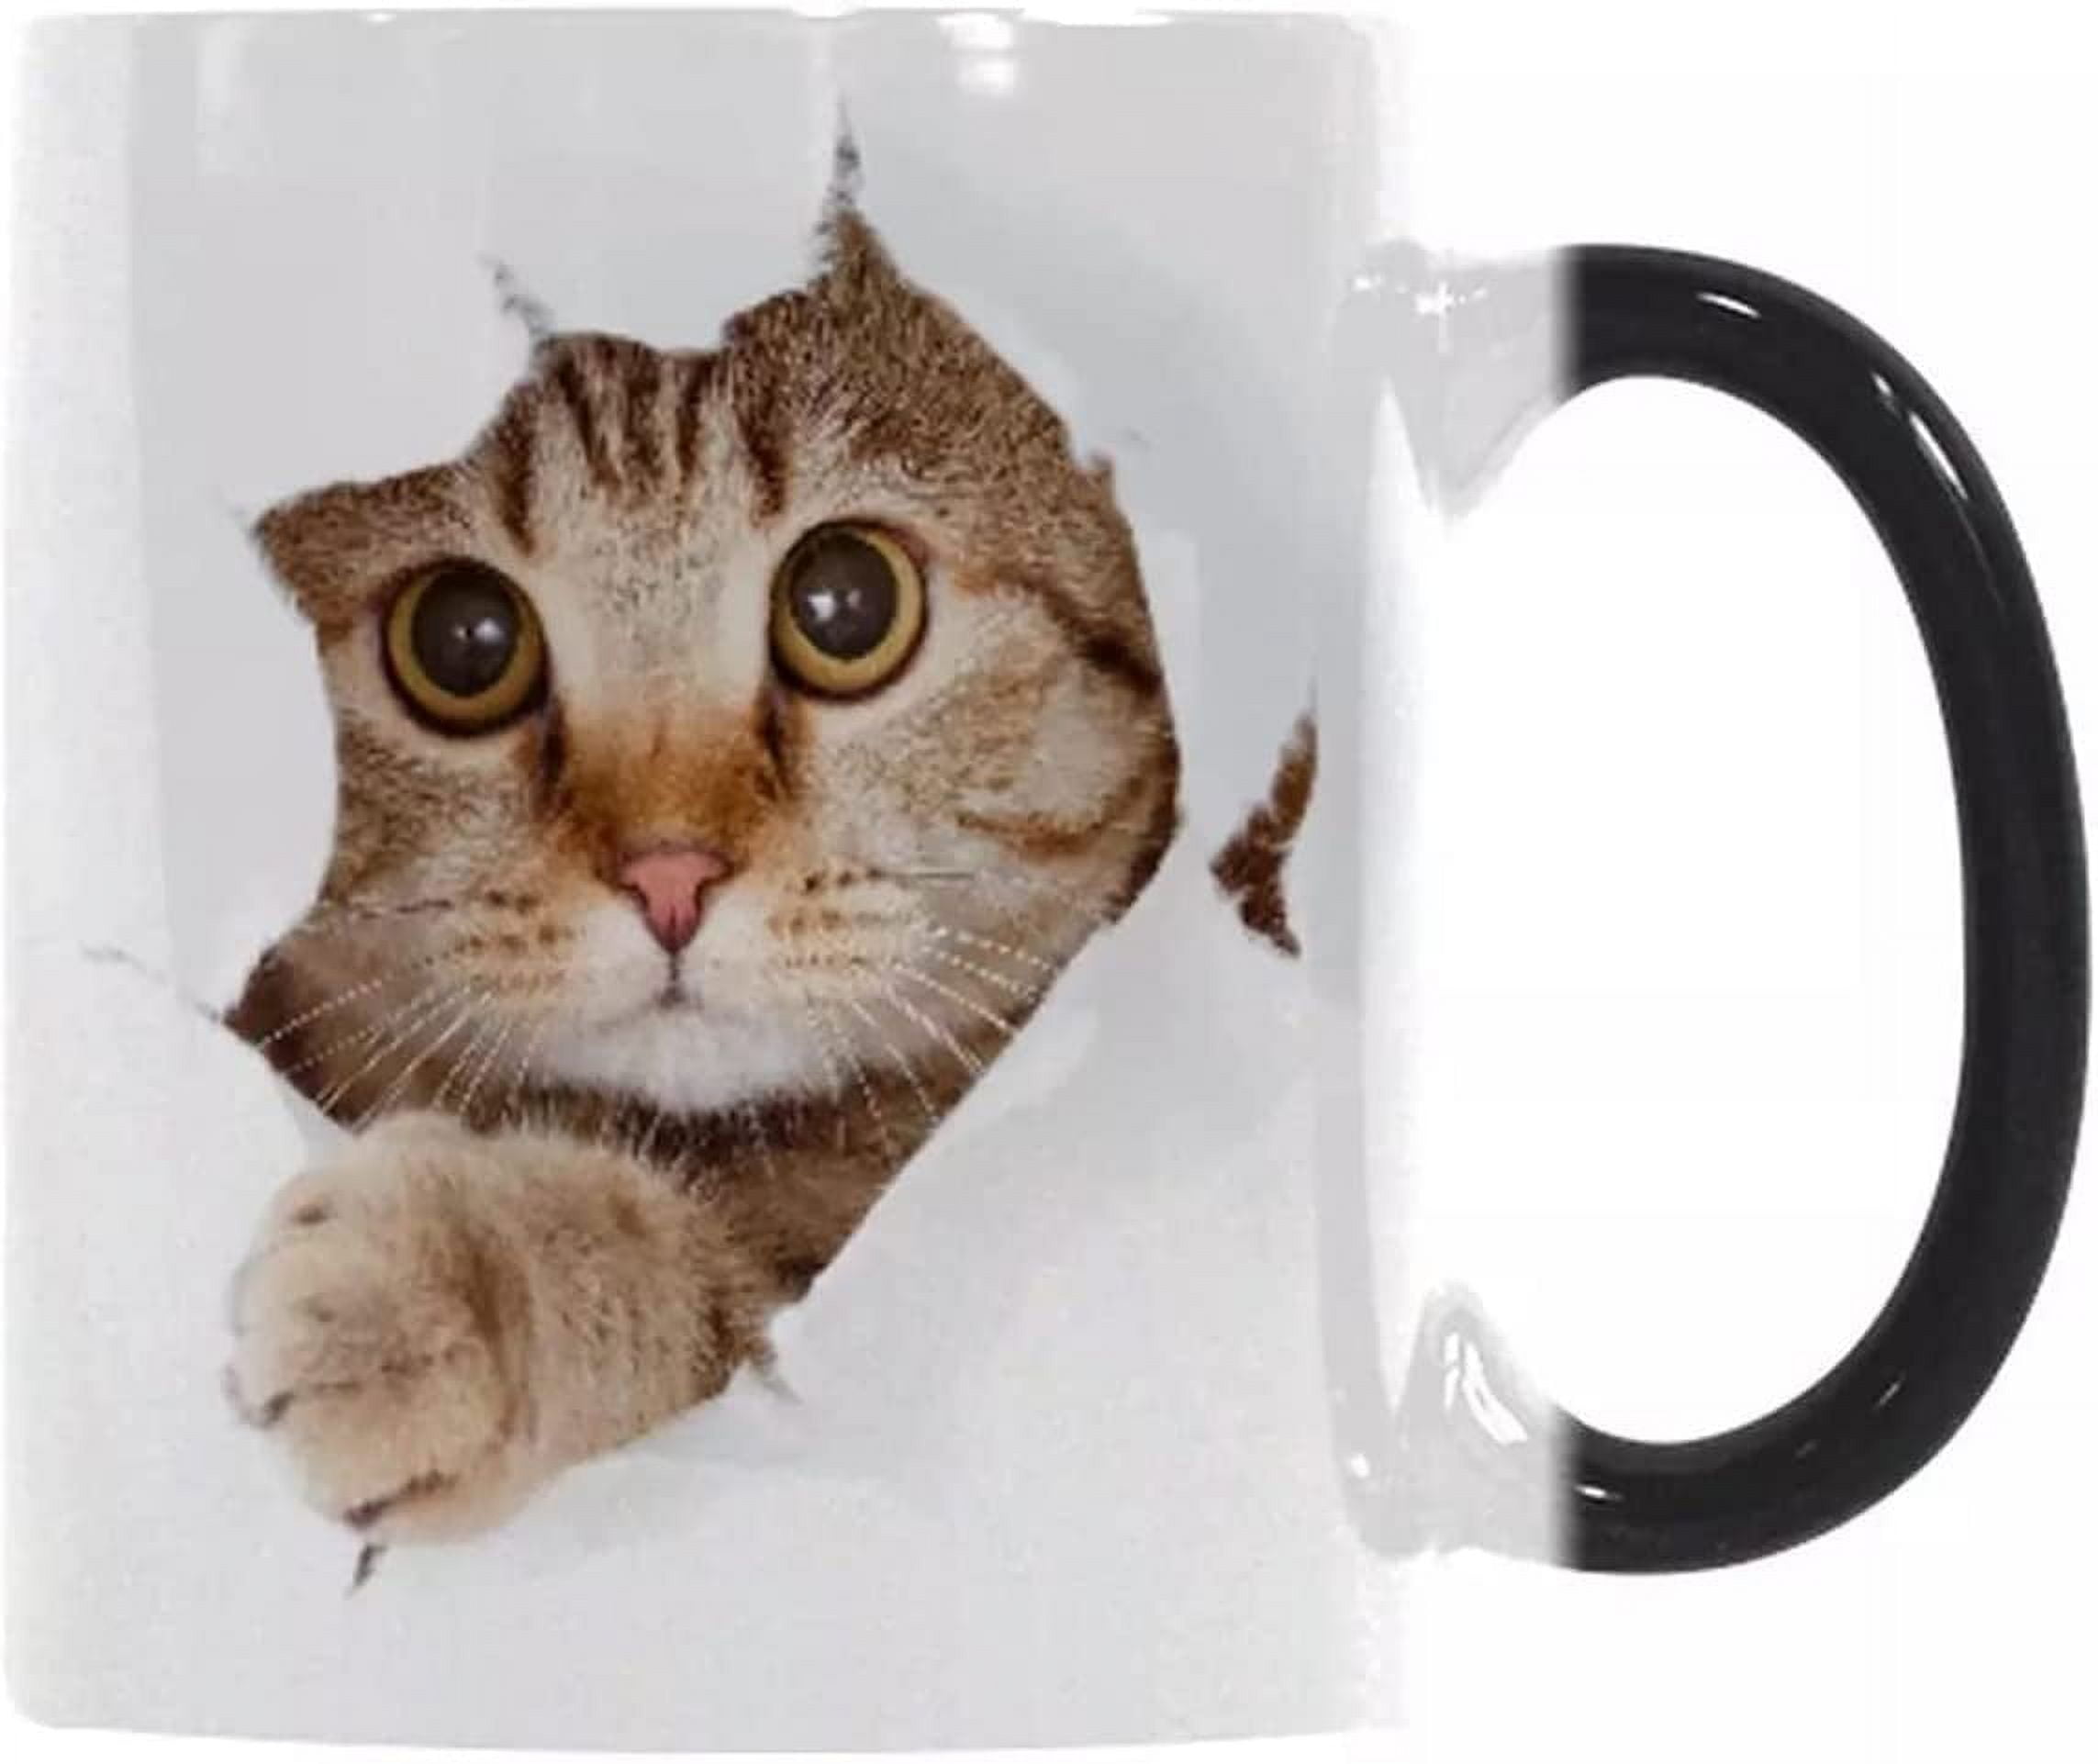 One Cat Leads to Another Magic Heat-Changing Coffee Mug